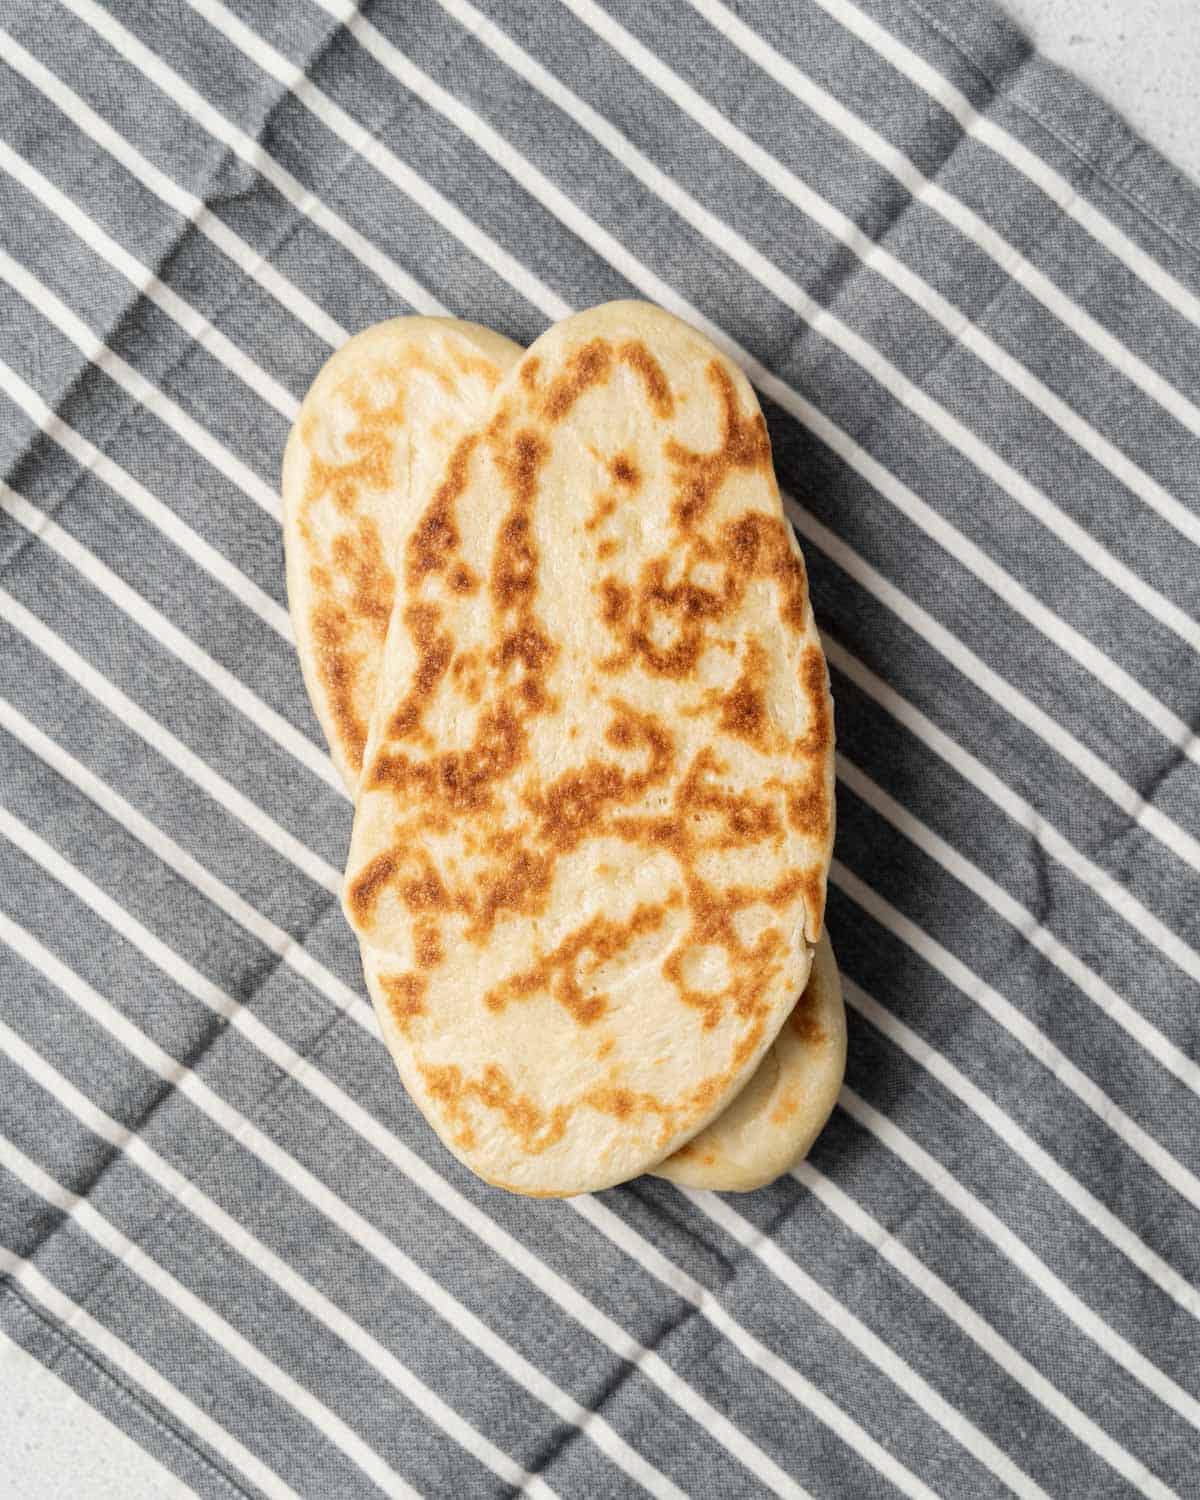 Wrapping naan in a towel.